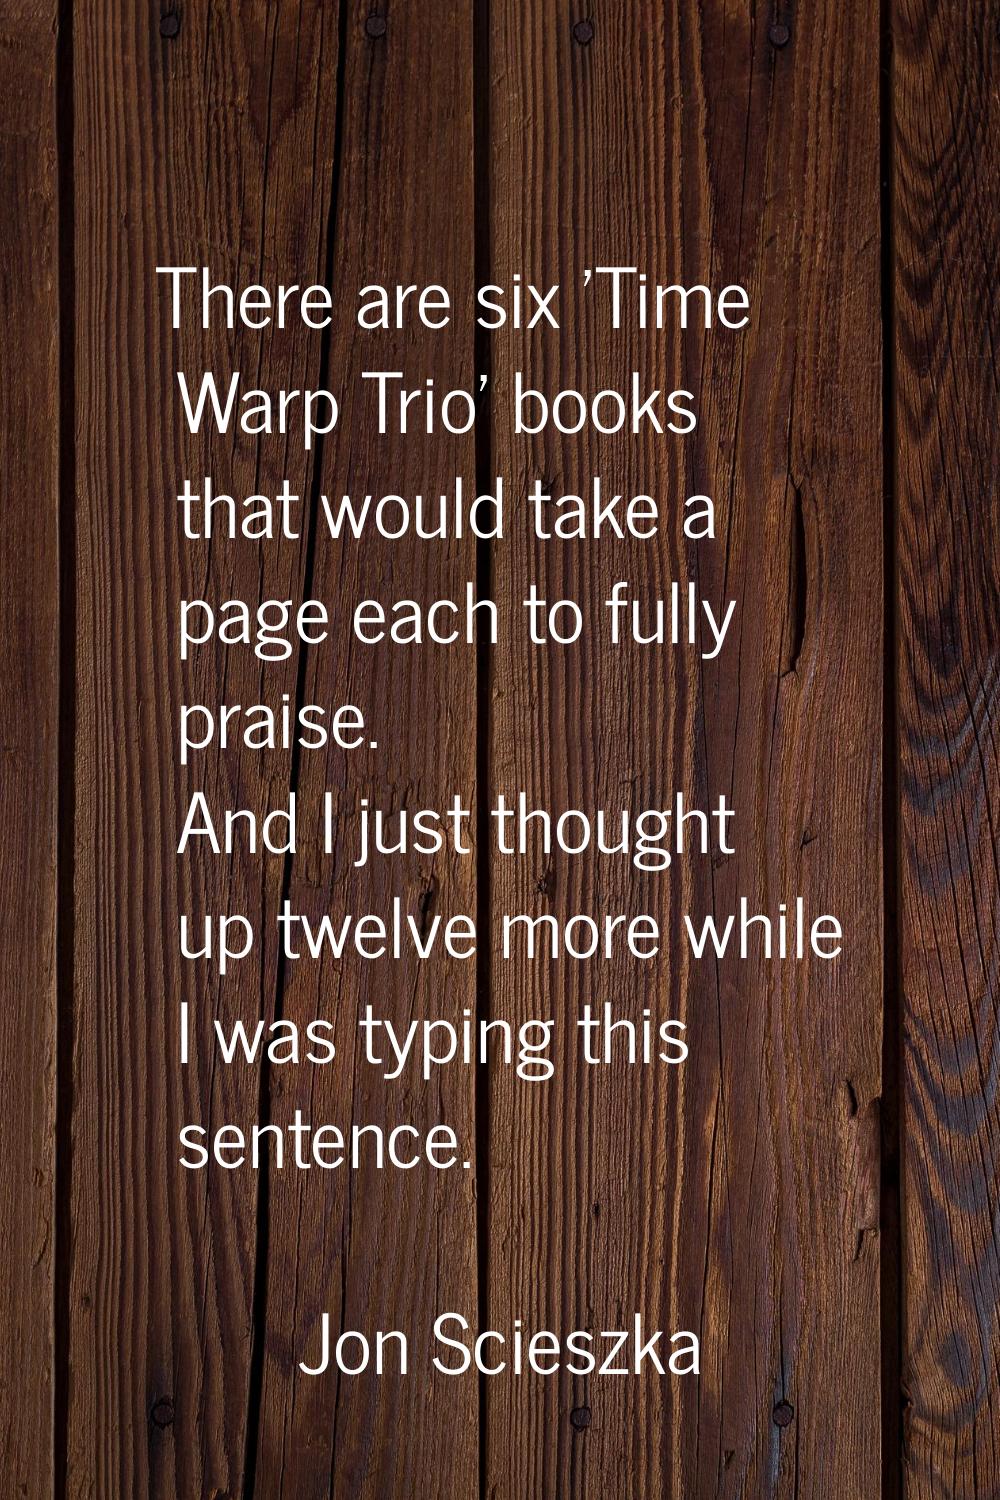 There are six 'Time Warp Trio' books that would take a page each to fully praise. And I just though